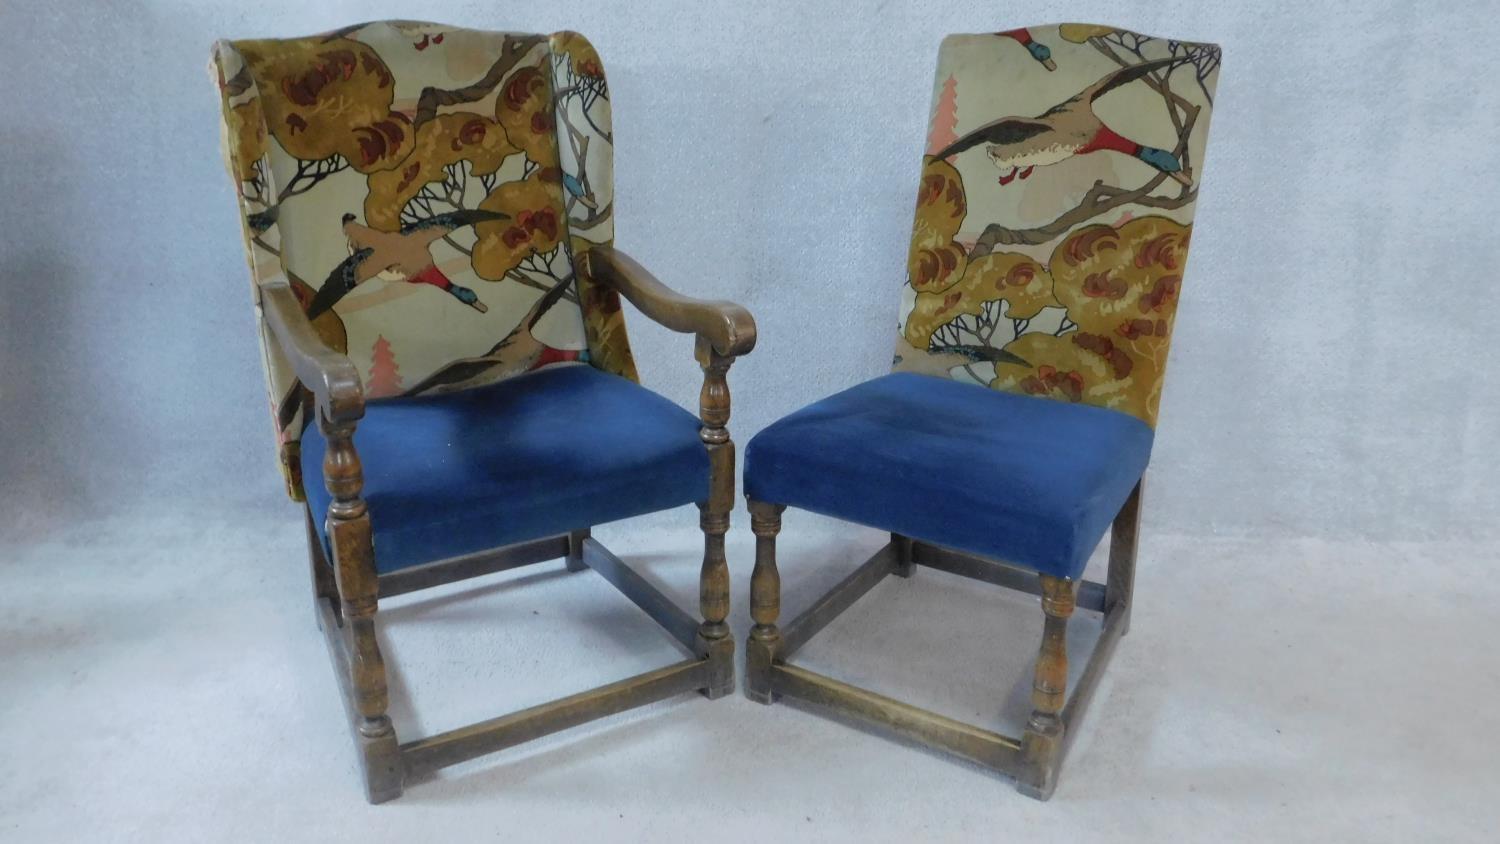 A set of twelve Jacobean style oak dining chairs in Arts and Crafts flying duck motif upholstery - Image 2 of 9